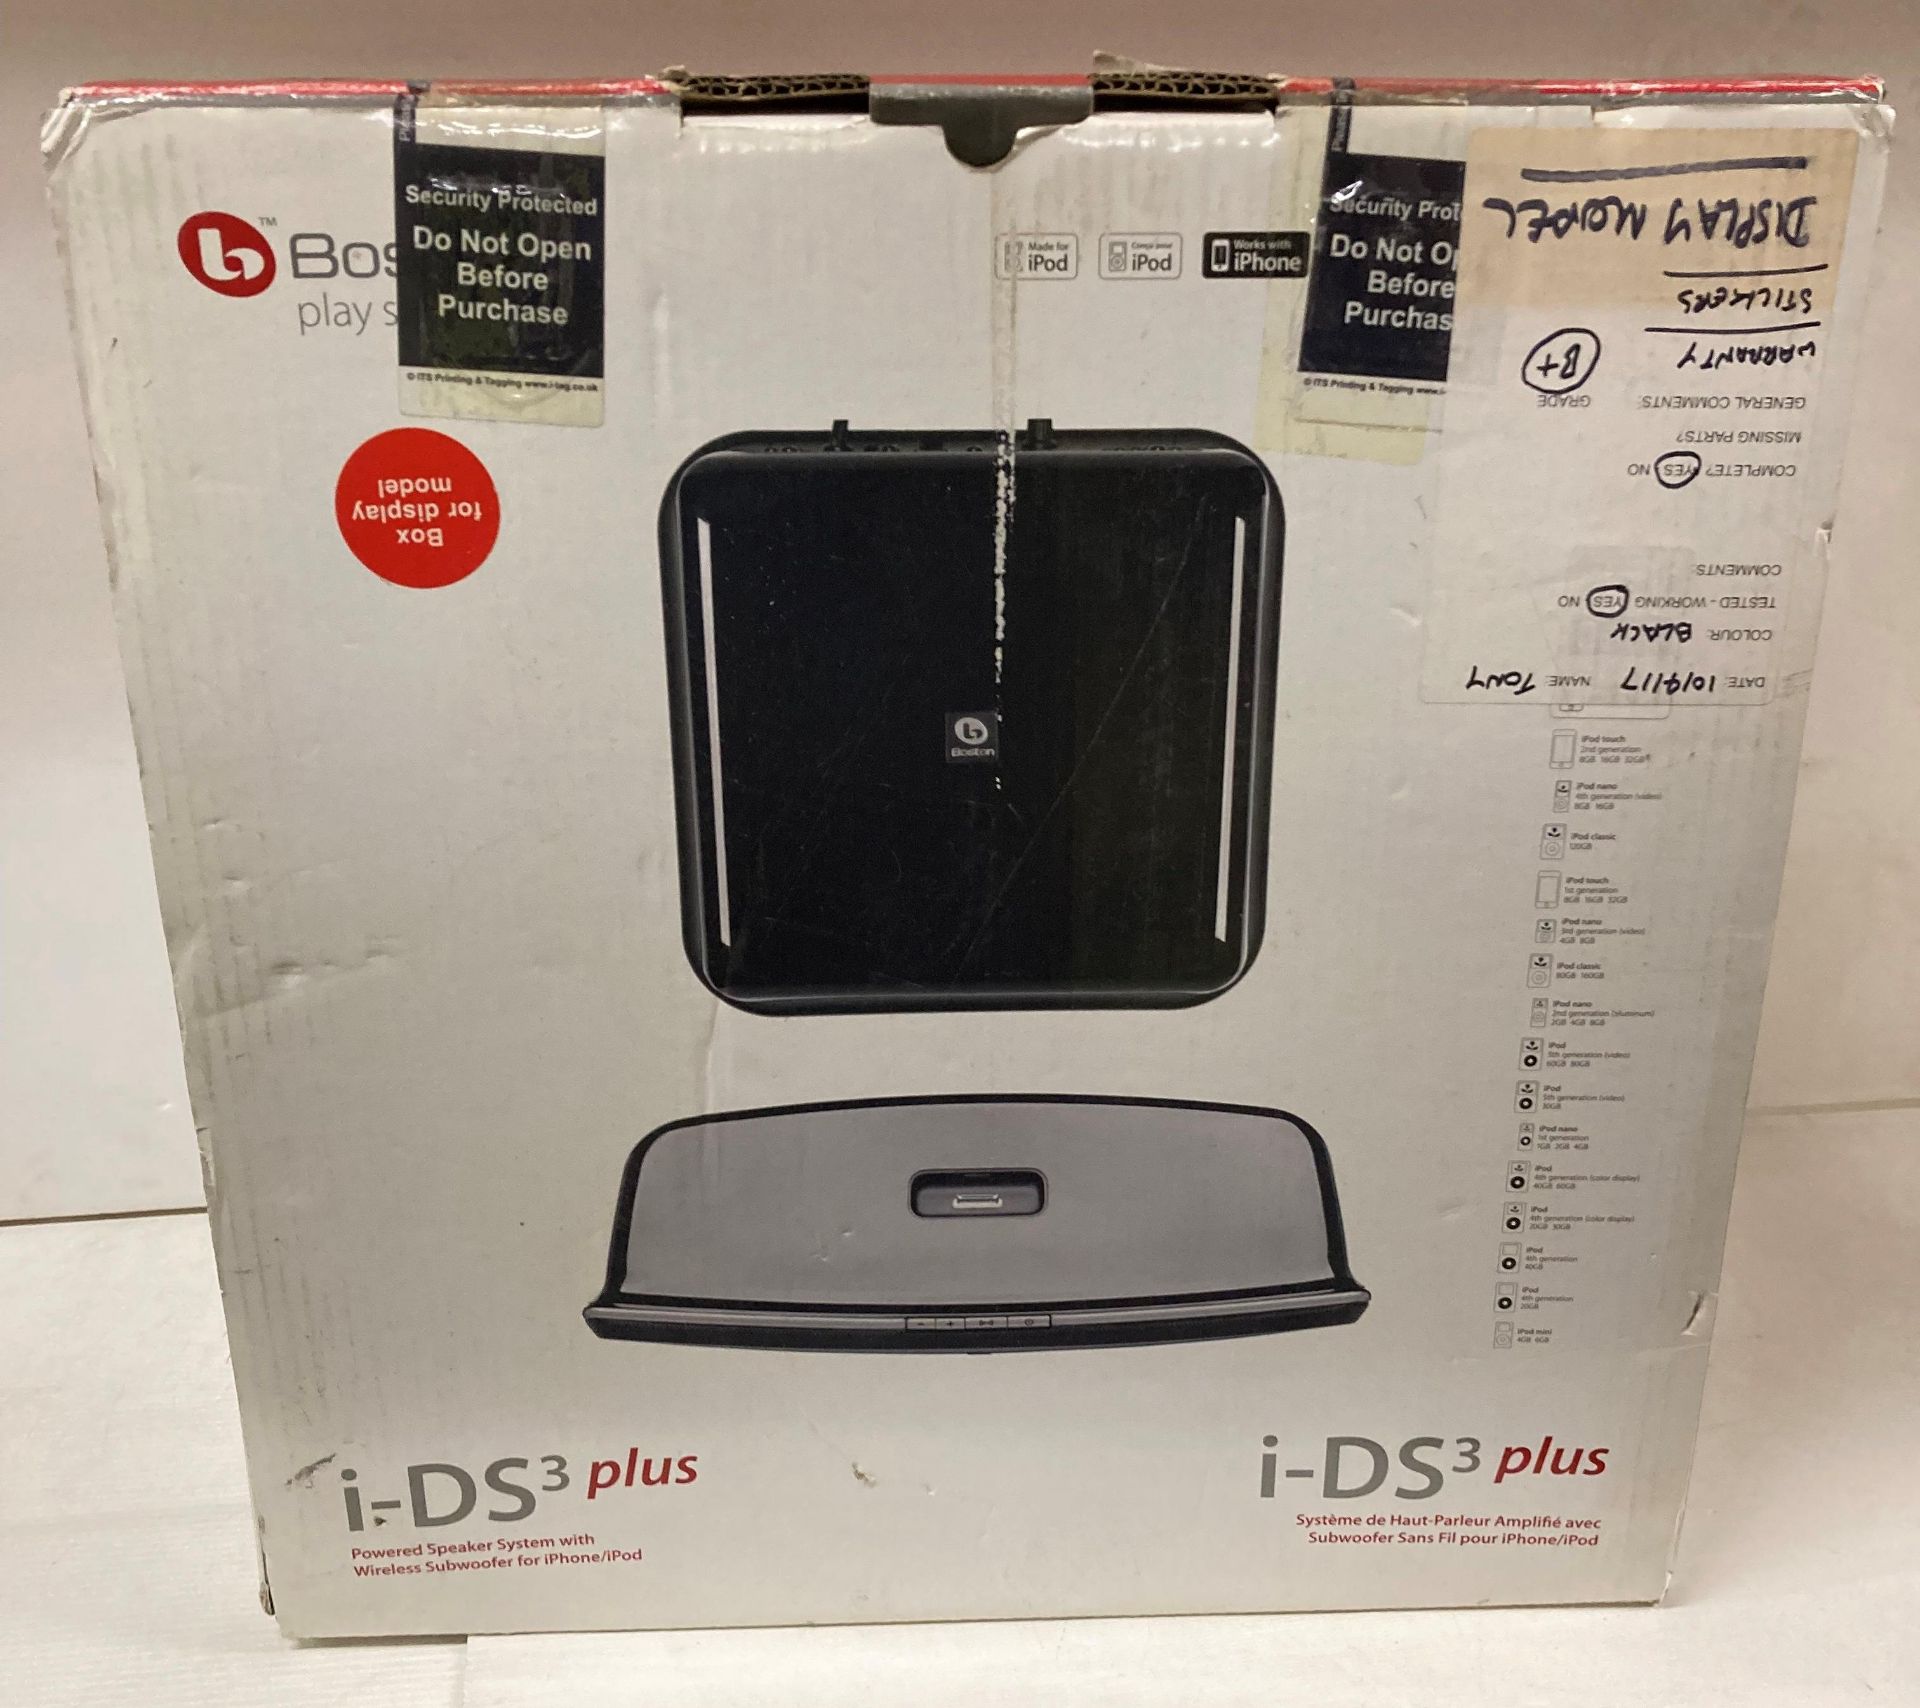 Boston I-DS3 plus powered speaker system with wireless subwoofer for iPhone/ iPod (saleroom